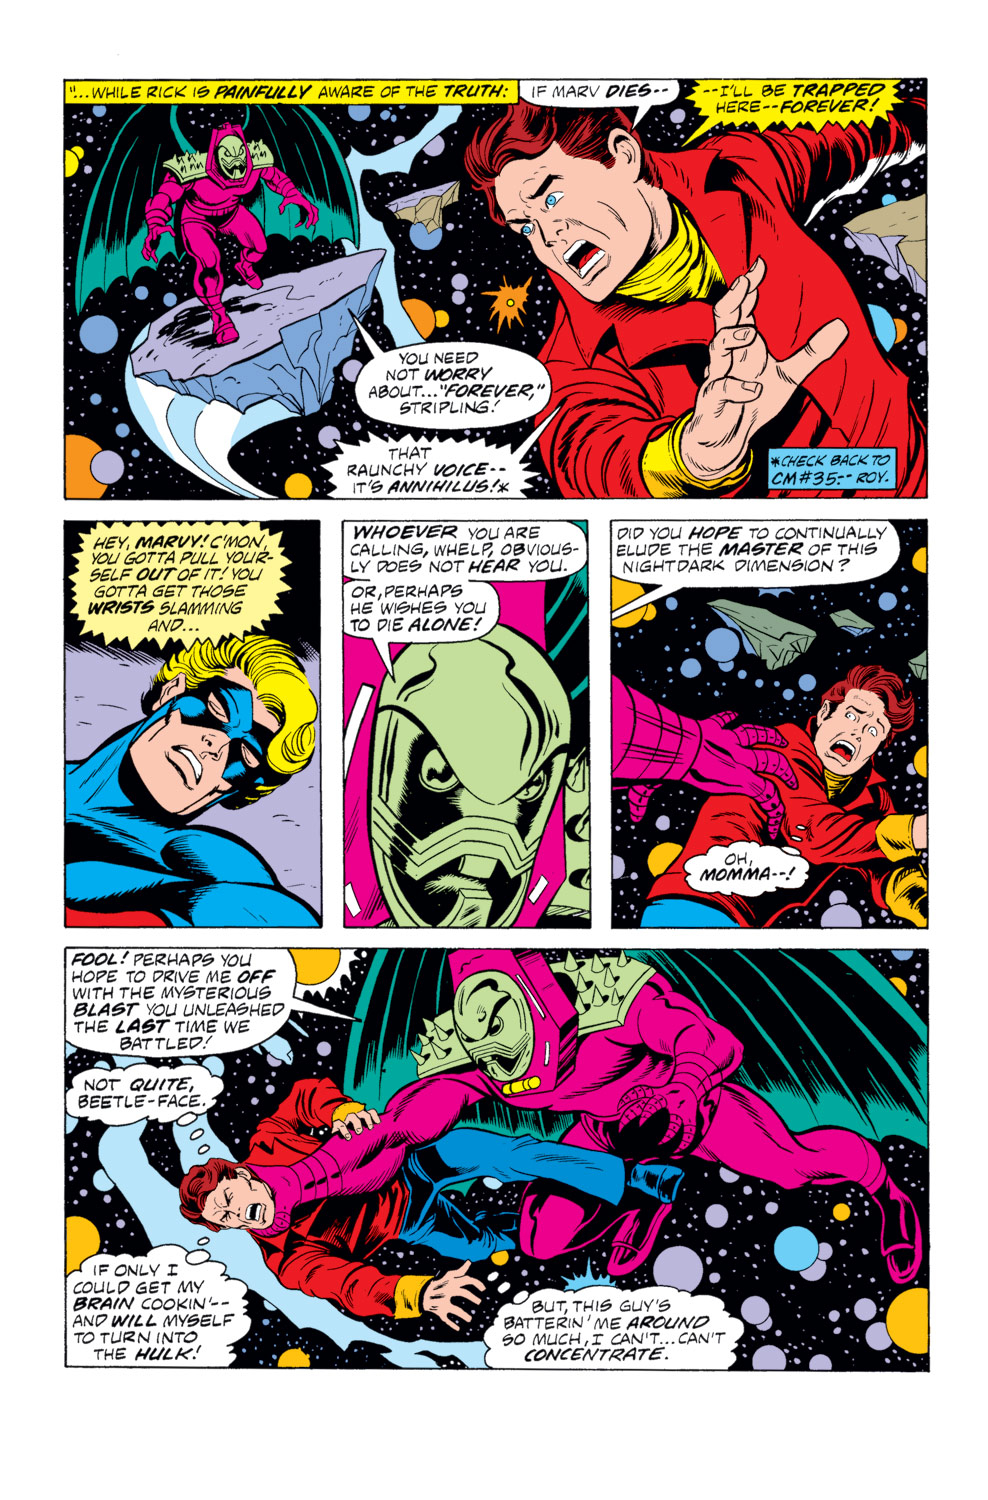 What If? (1977) issue 12 - Rick Jones had become the Hulk - Page 21